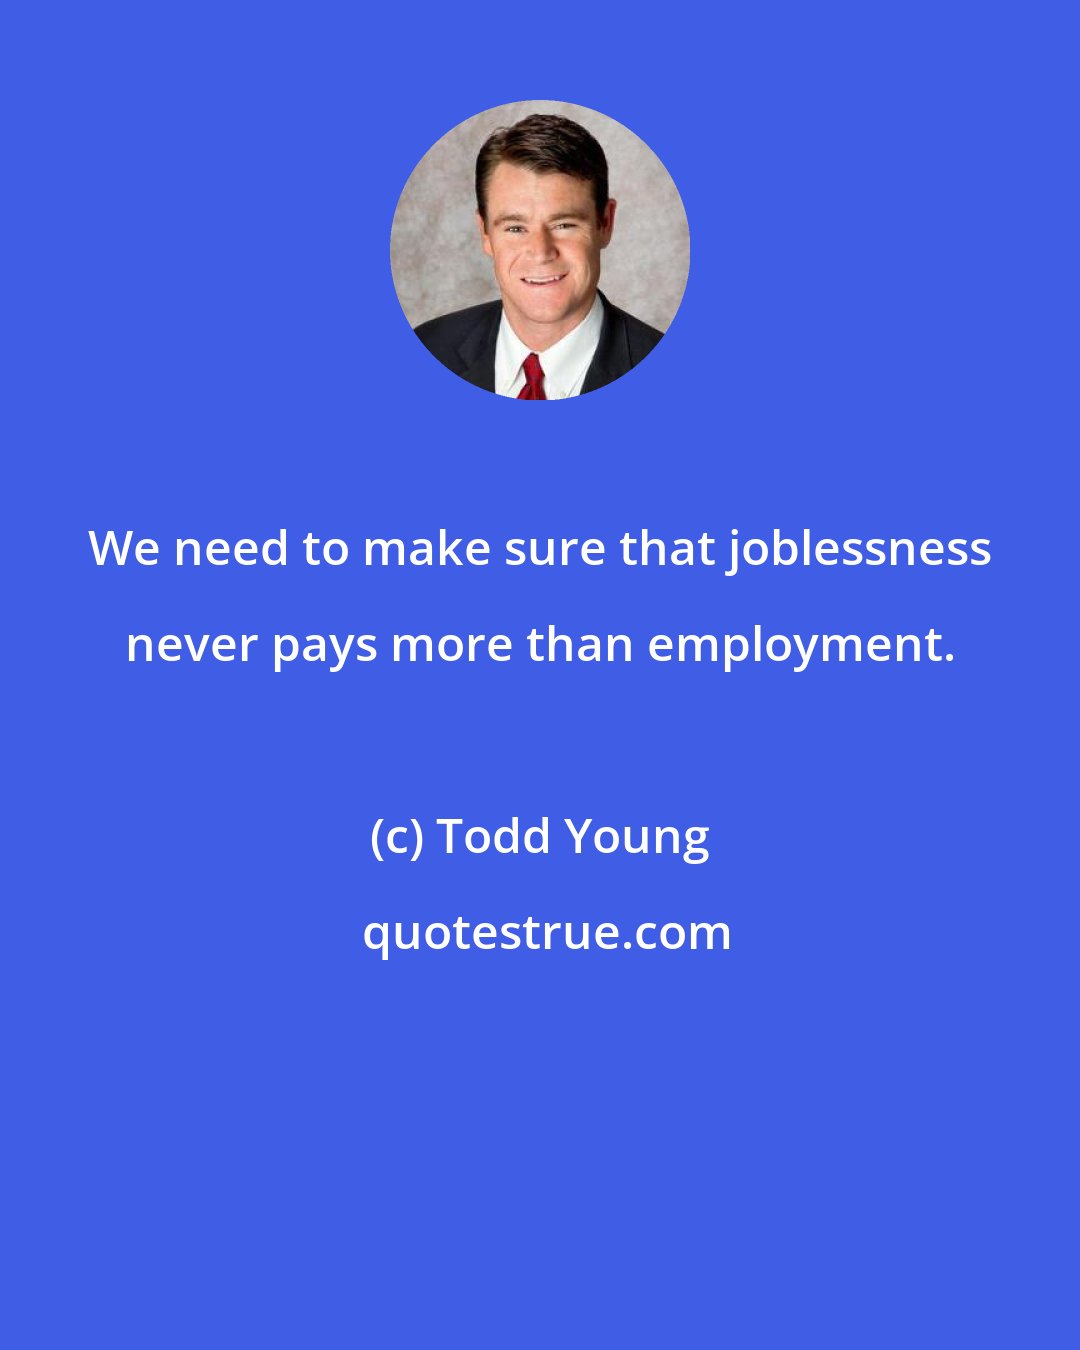 Todd Young: We need to make sure that joblessness never pays more than employment.